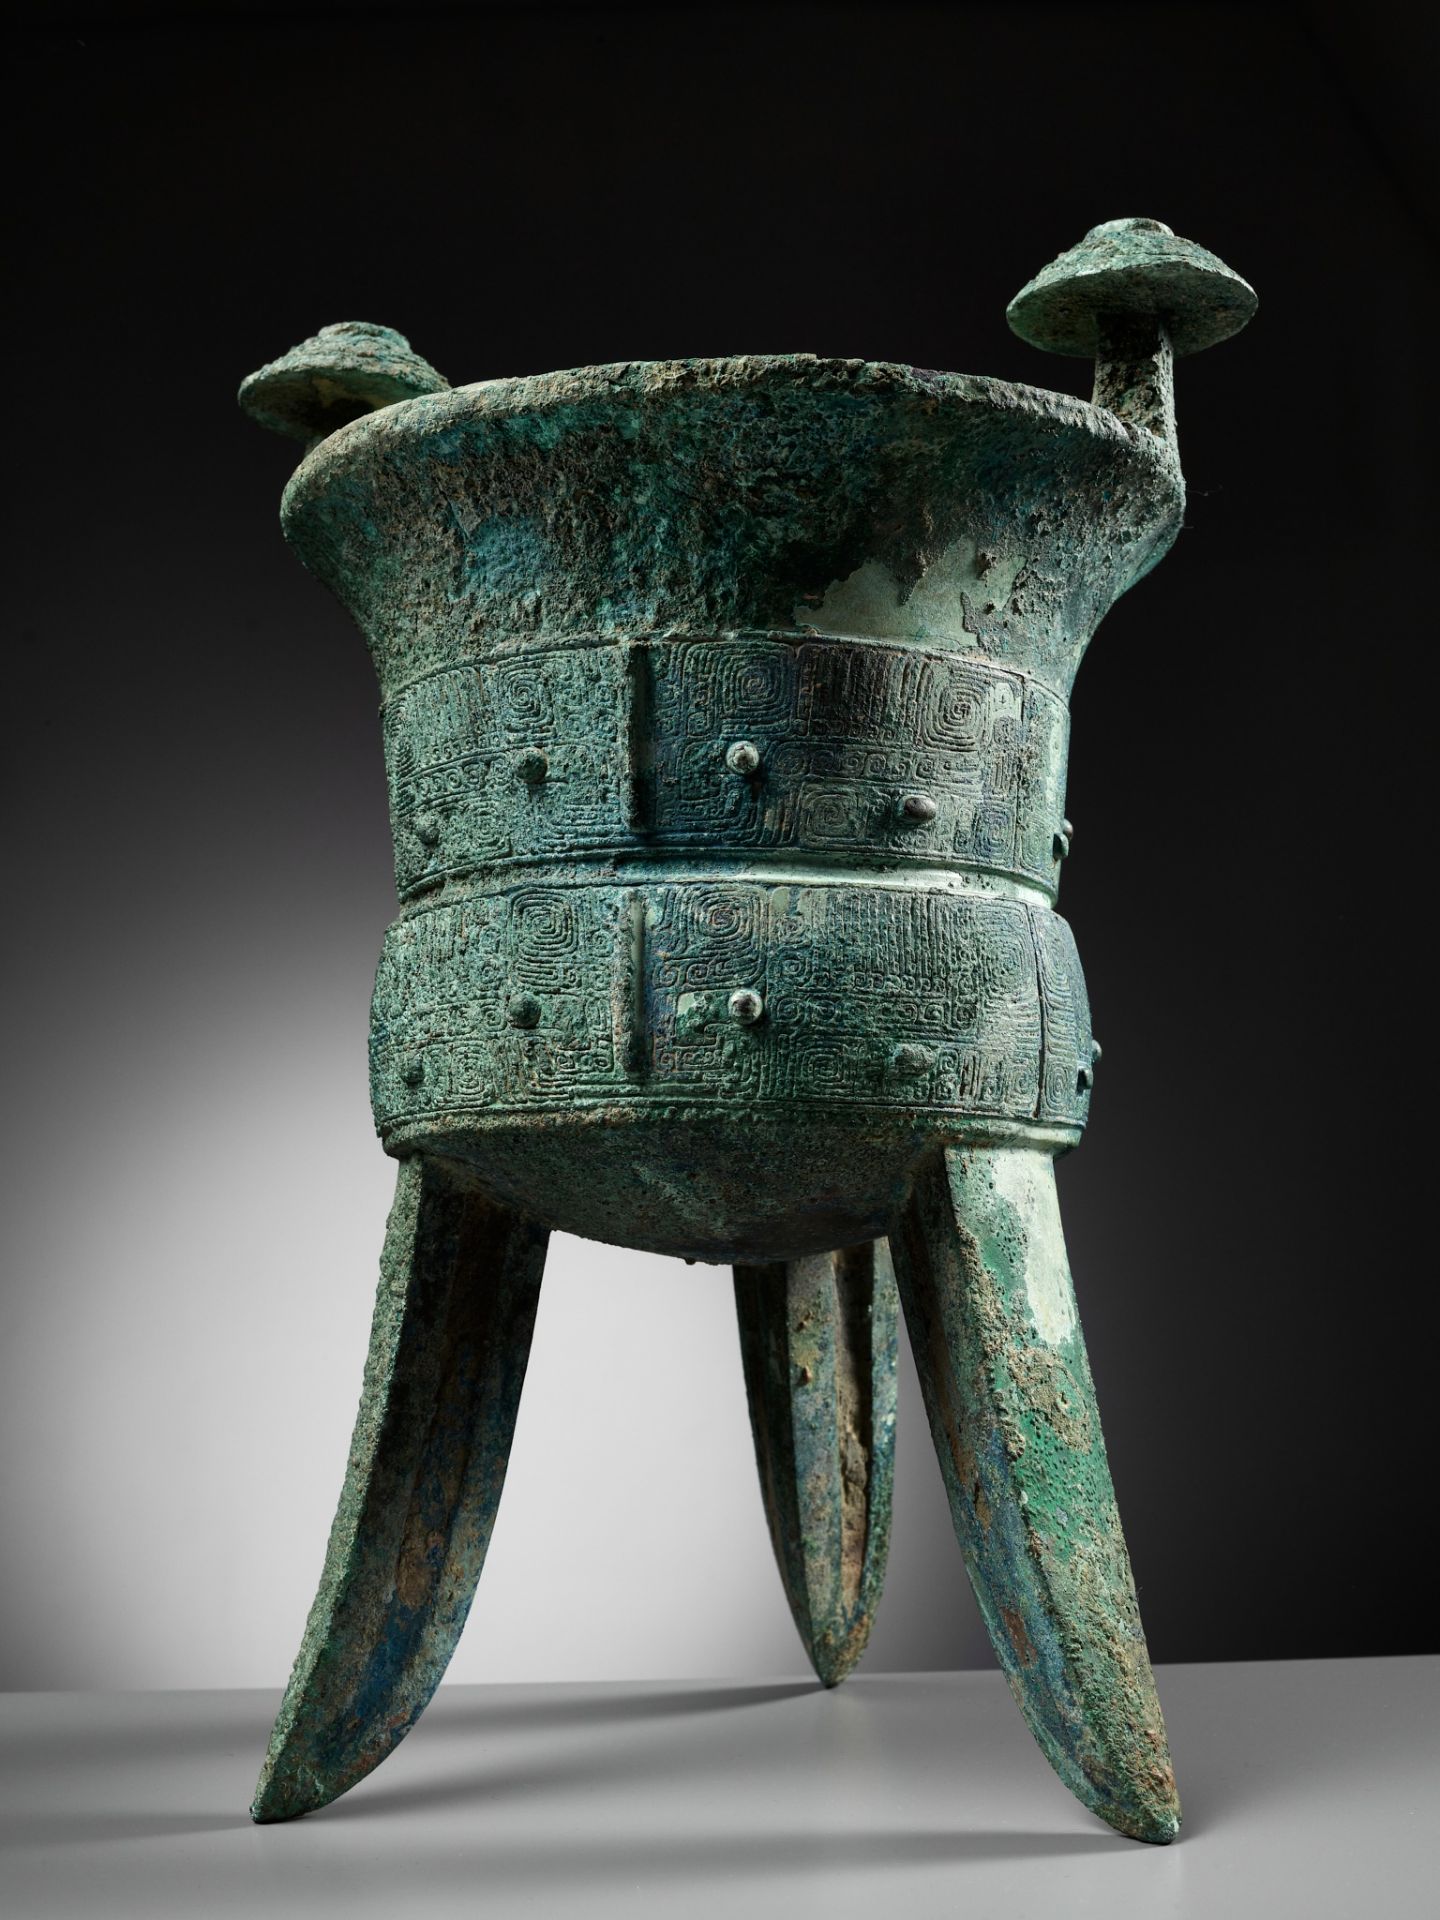 AN EXCEPTIONALLY LARGE AND MASSIVE BRONZE RITUAL TRIPOD WINE VESSEL, JIA, WITH A CLAN MARK, SHANG